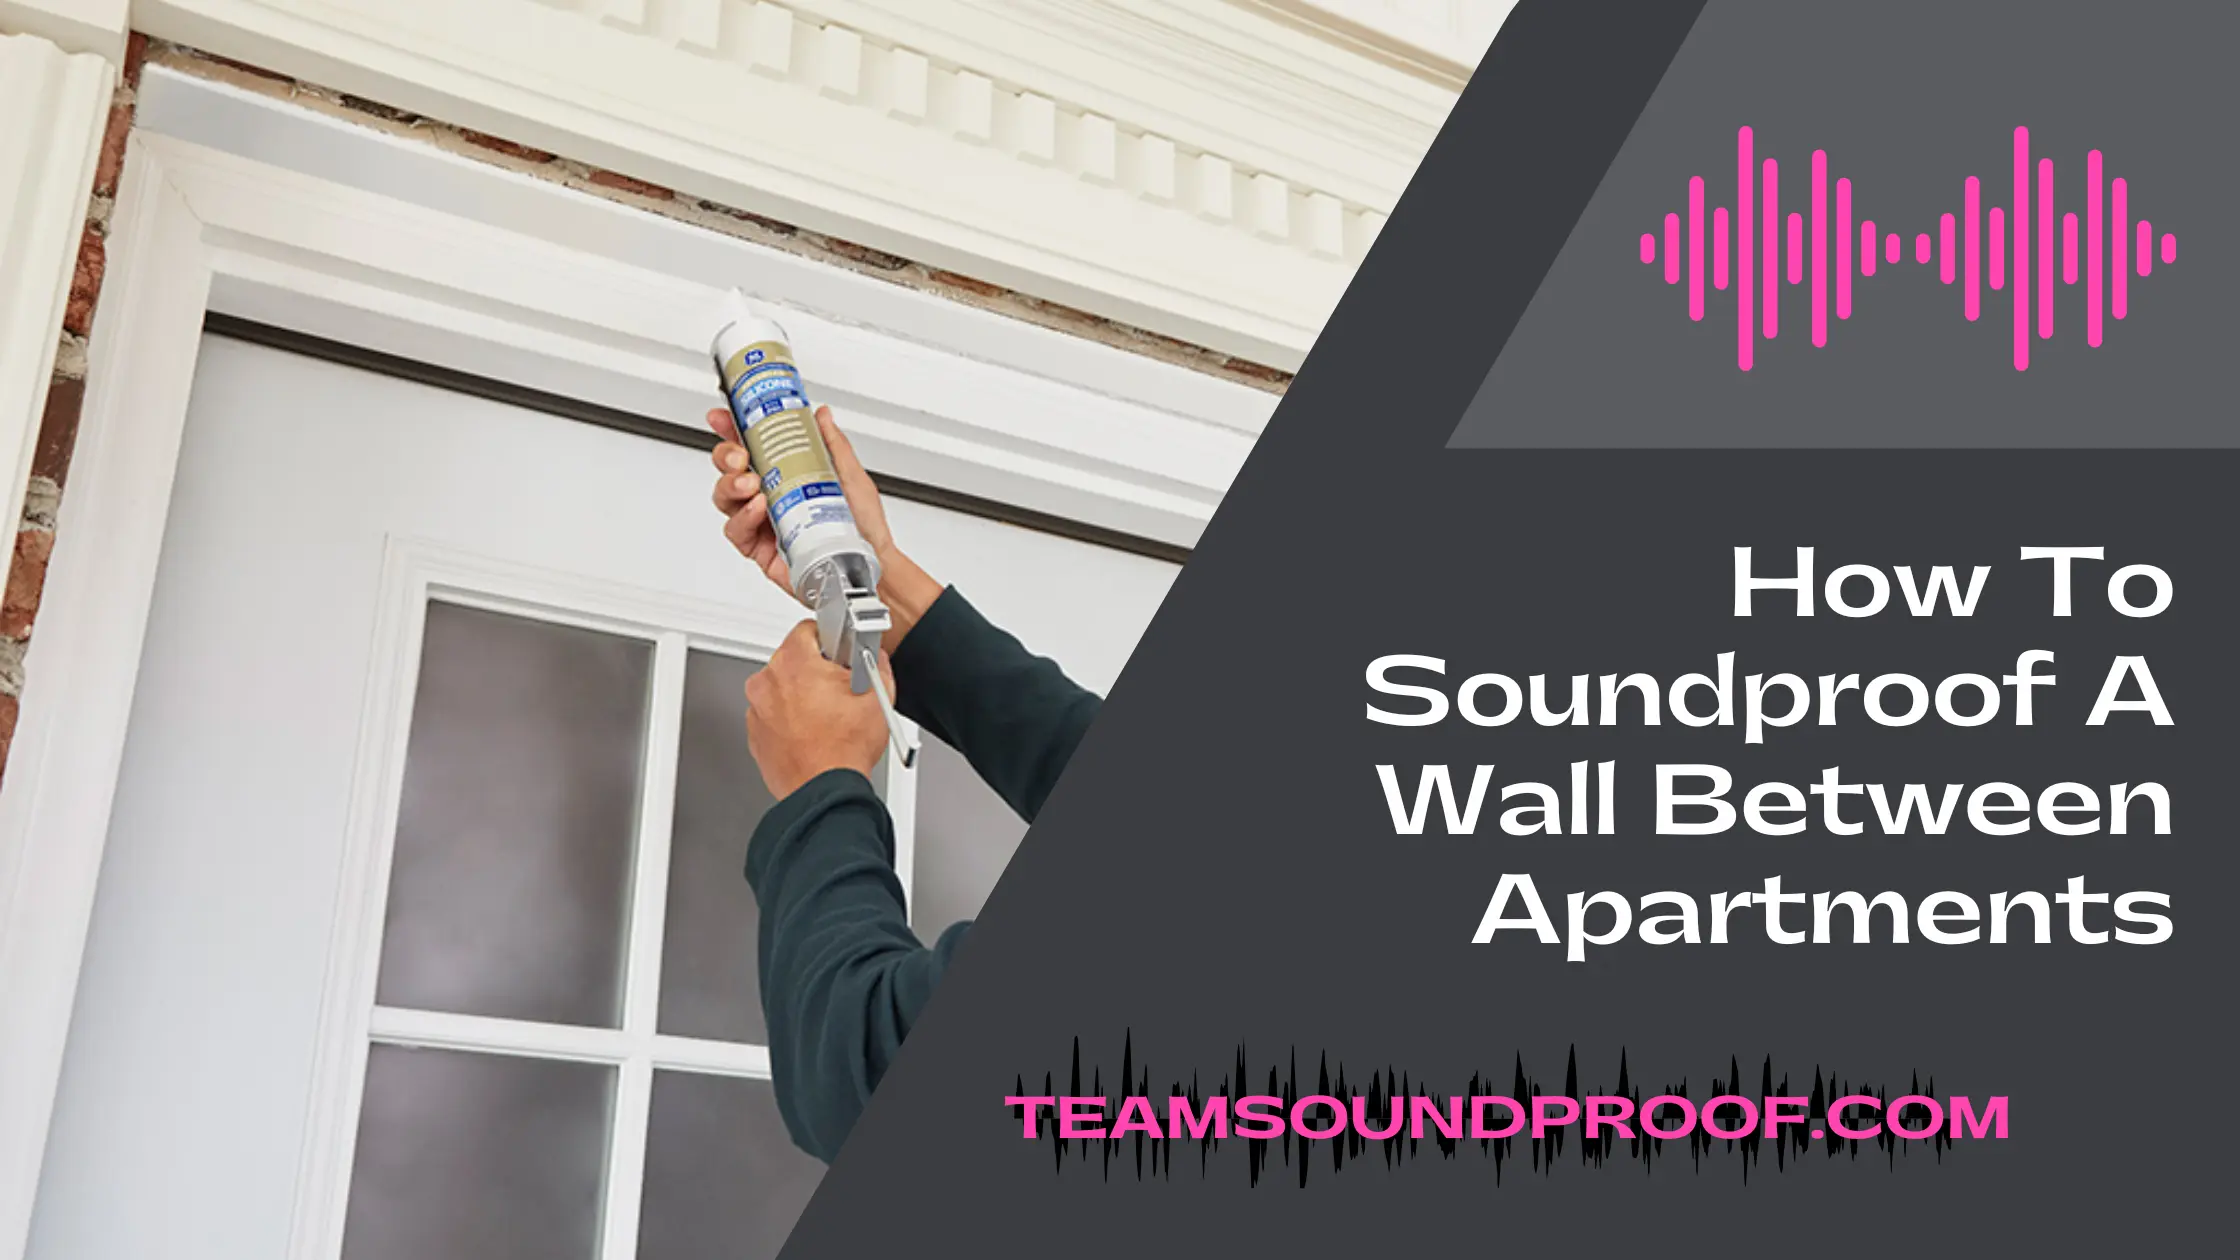 How To Soundproof A Wall Between Apartments?